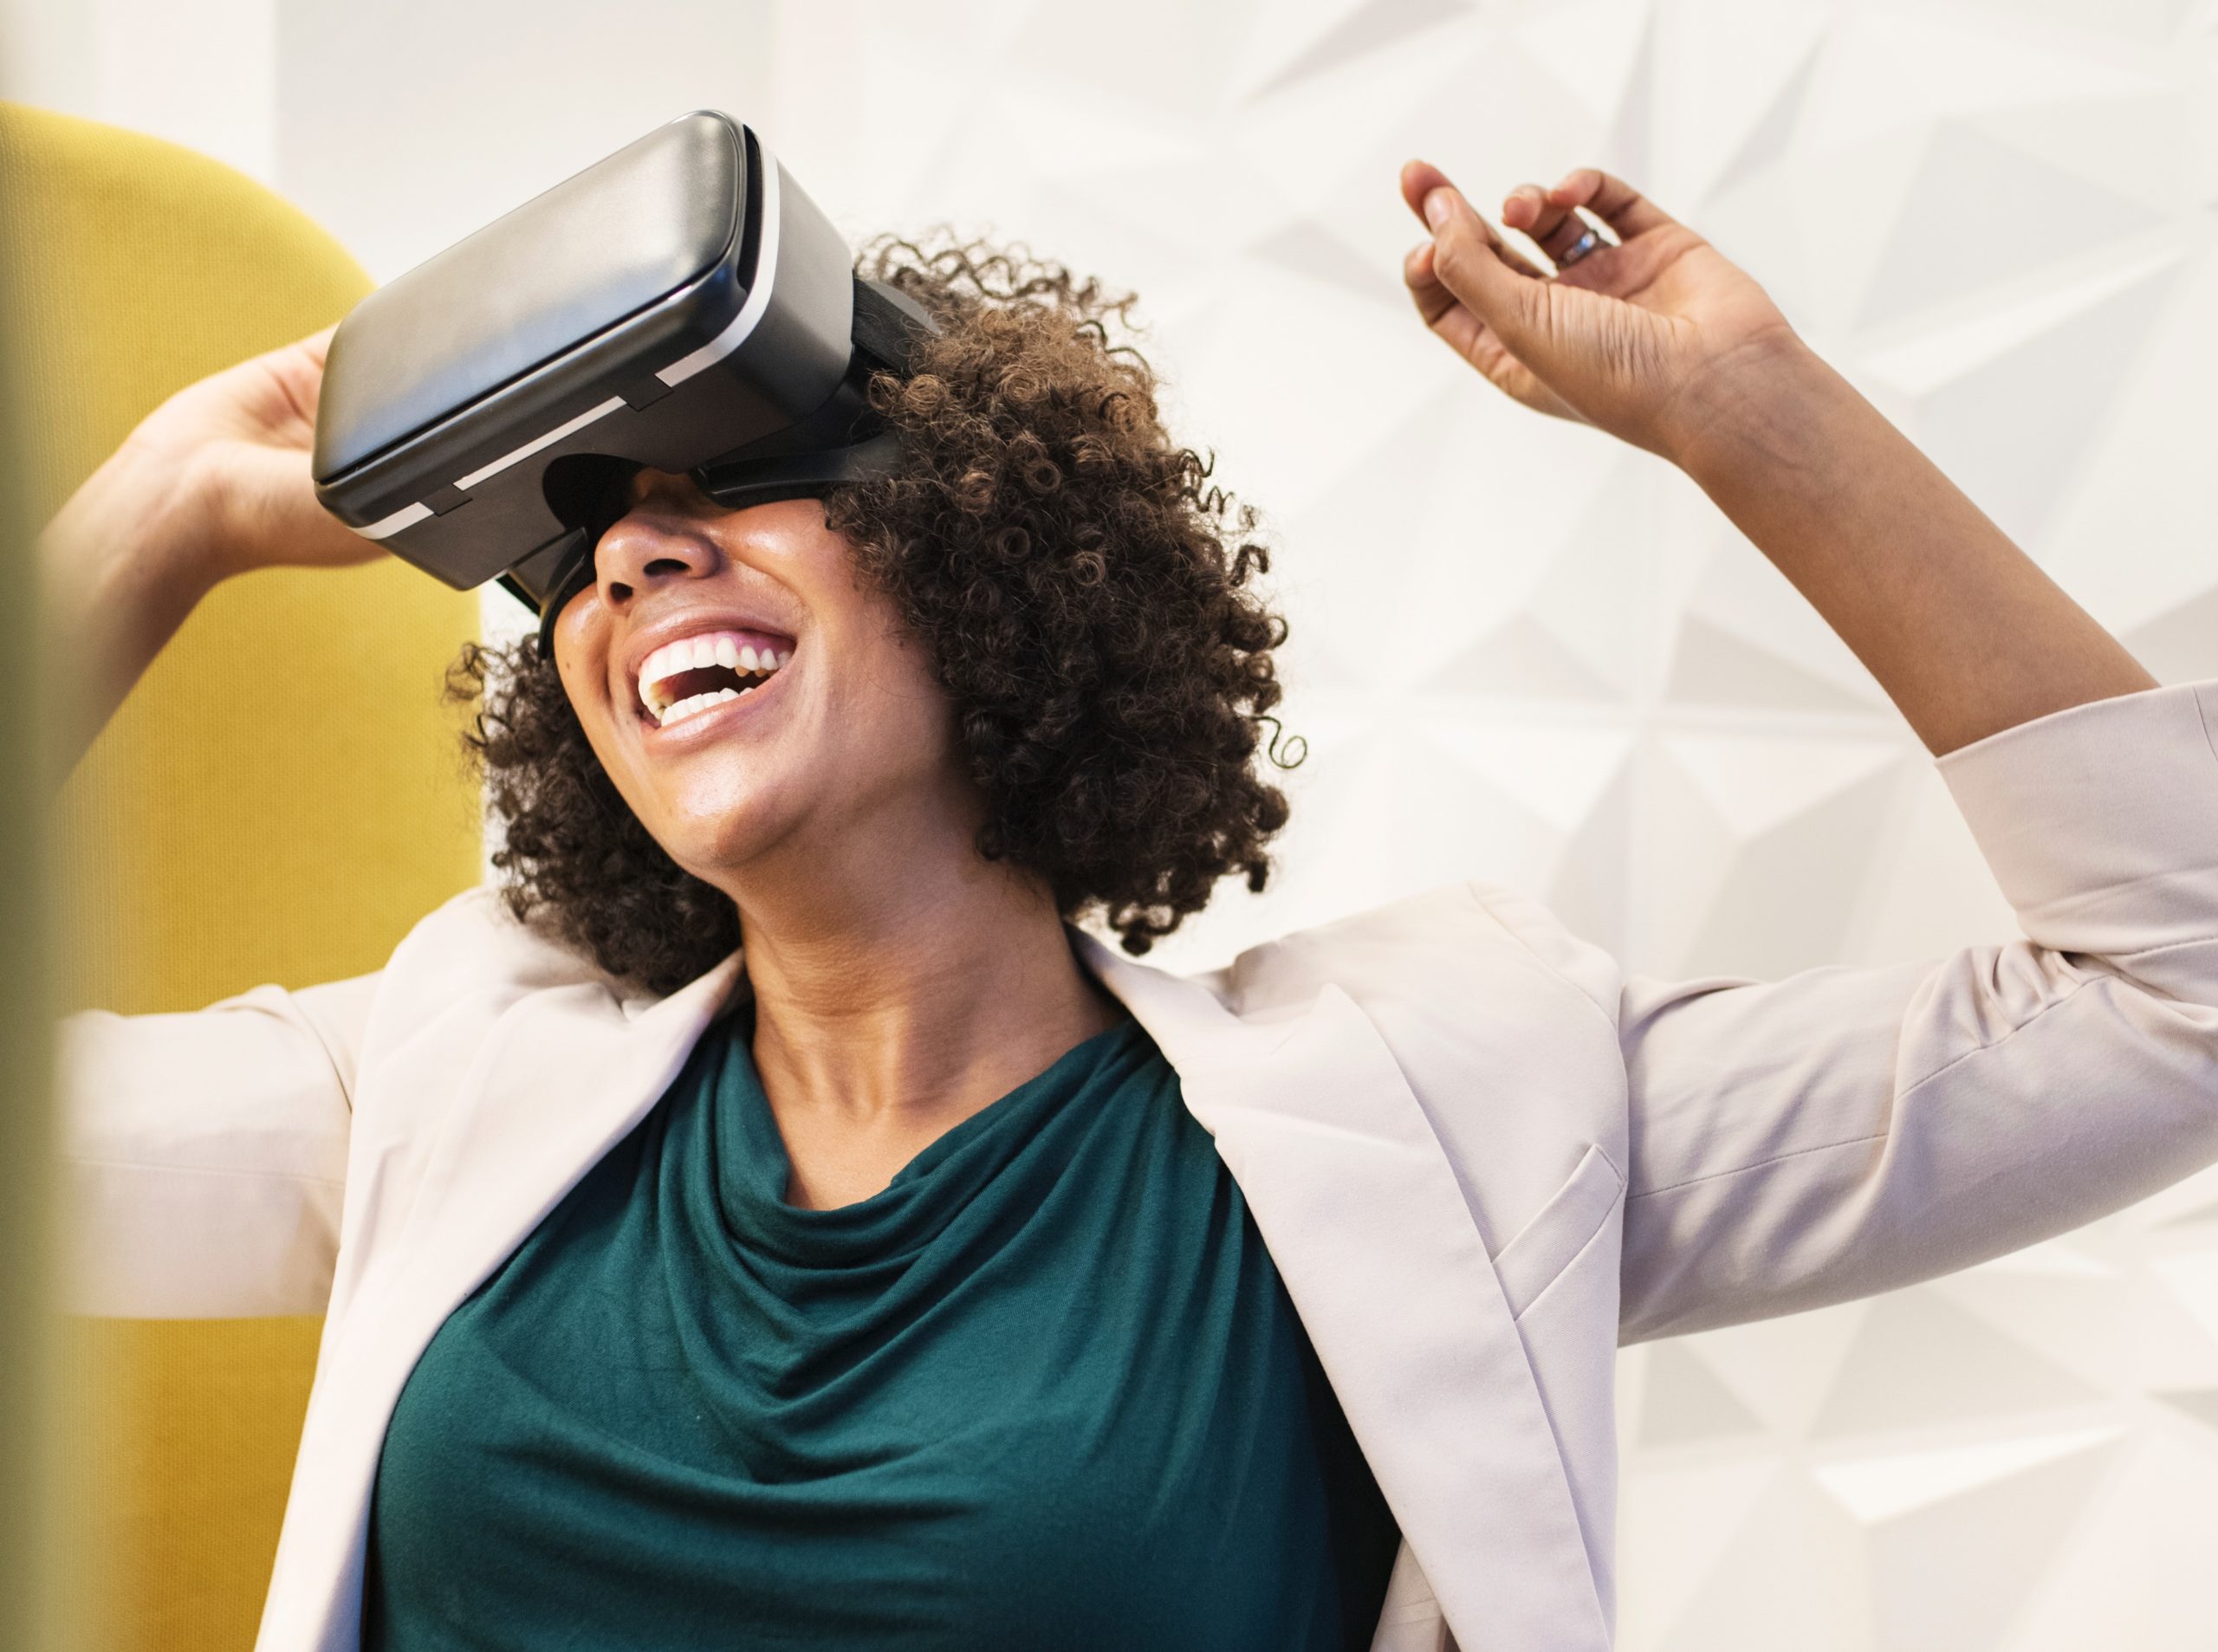 A woman smiling while wearing virtual reality headset